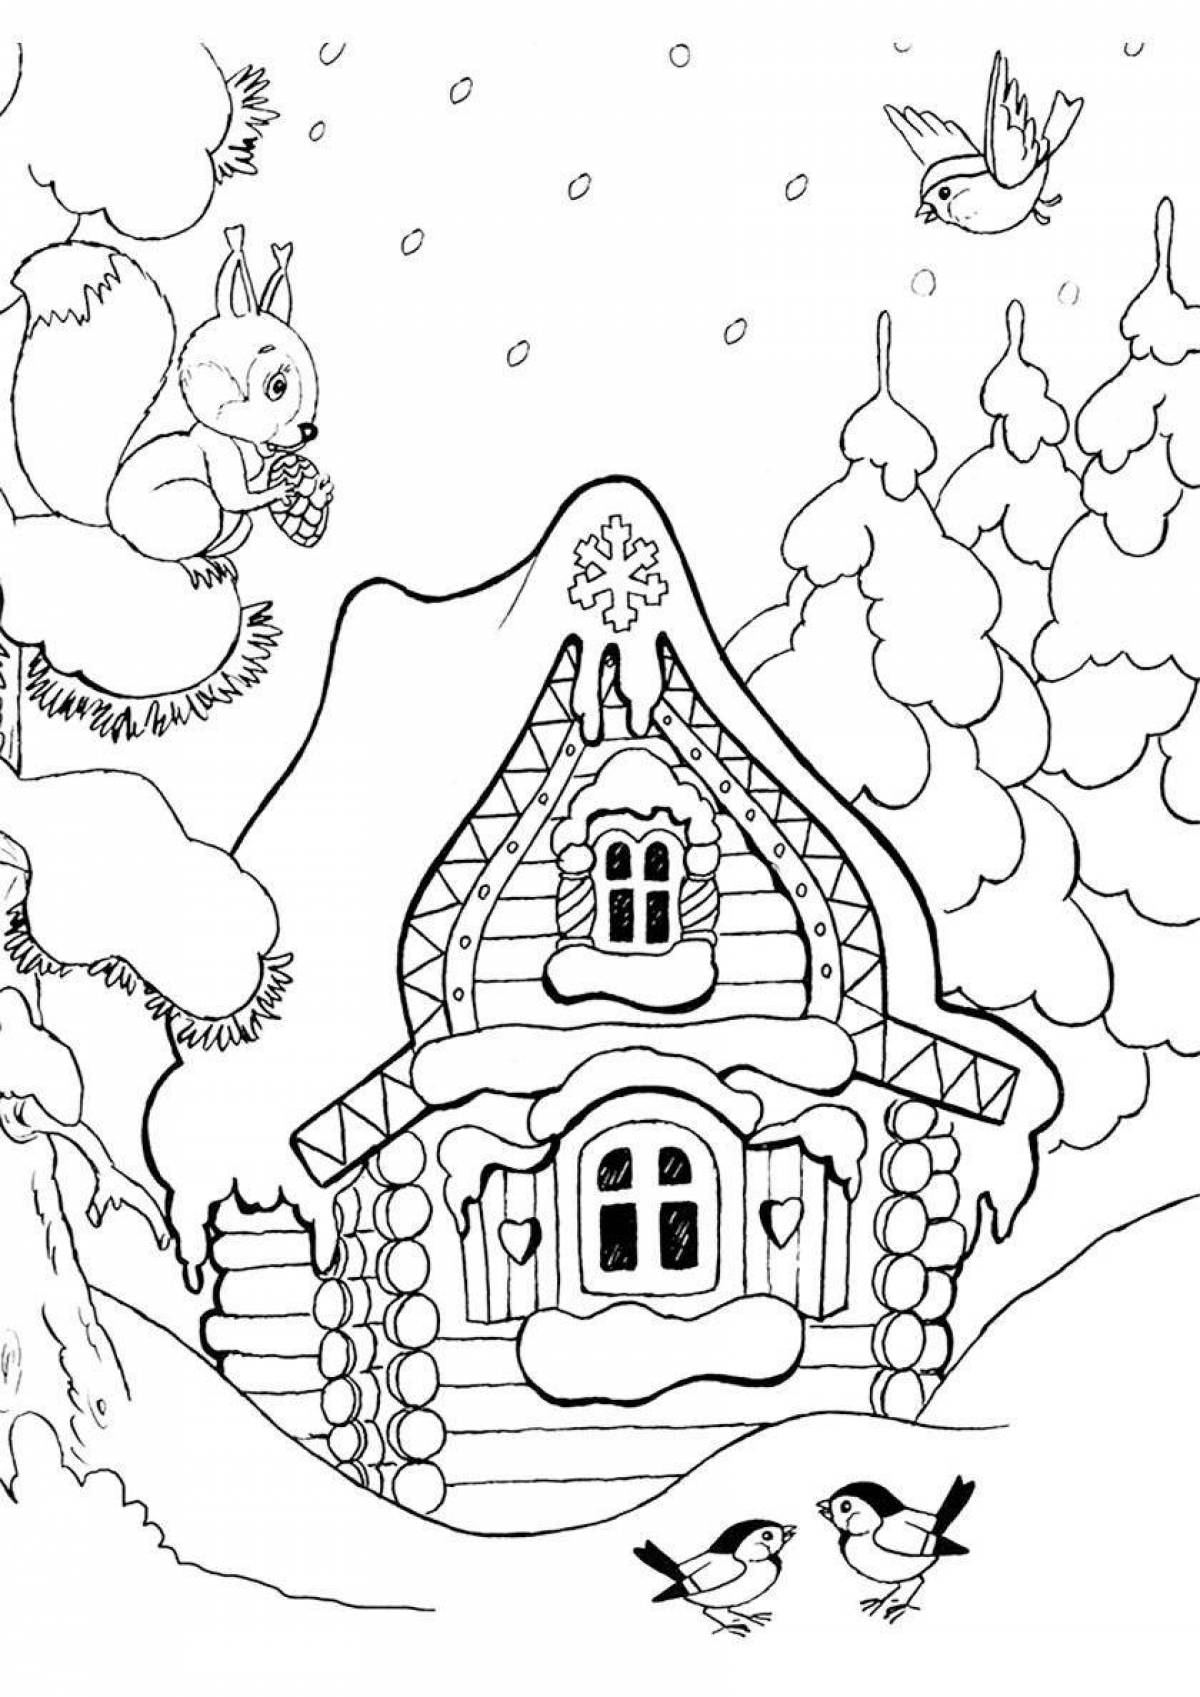 Exquisite Russian winter coloring book